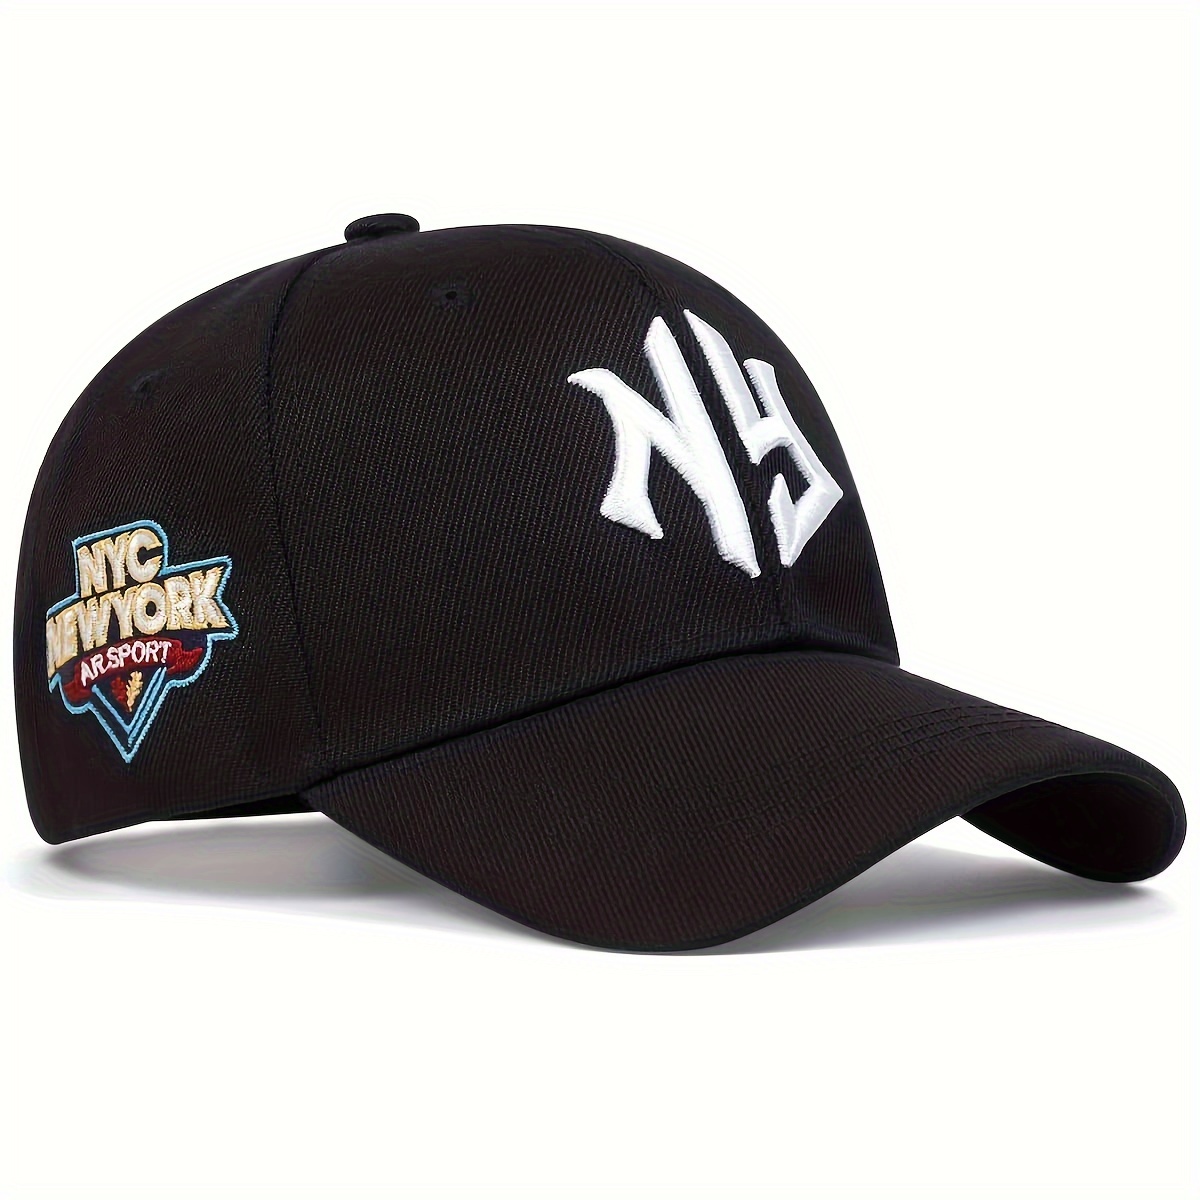 

1pc Men's Baseball Cap Ng Nyc New York Embroidered Cao, Outdoor Sun Hat Adjustable Casual Hat For Travel Vacation